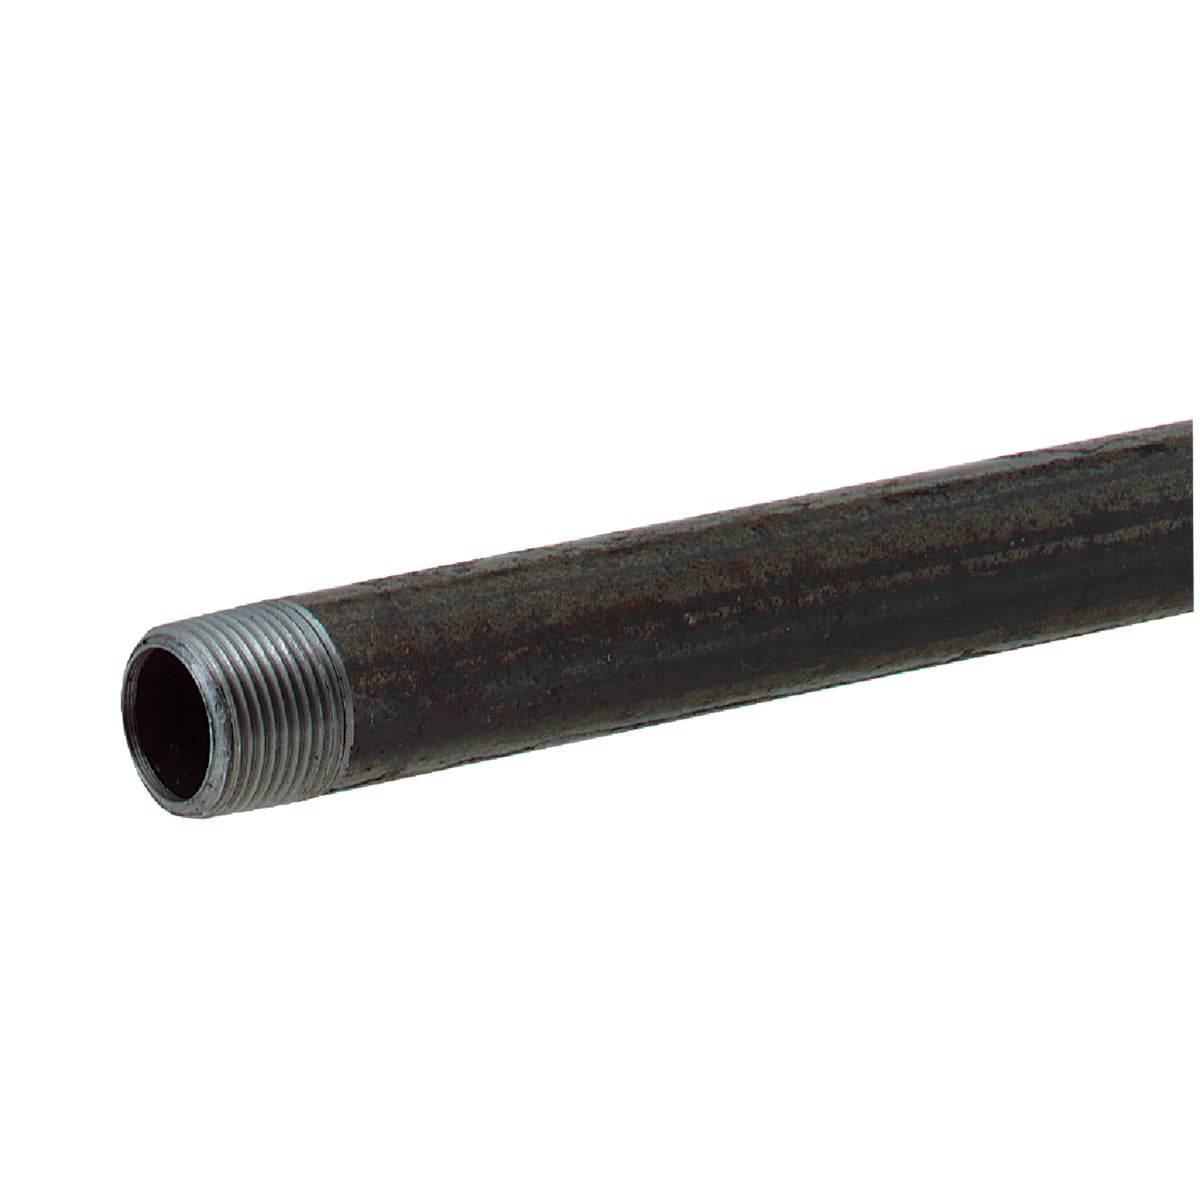 1-1/2X36 BLK RDI-CT PIPE